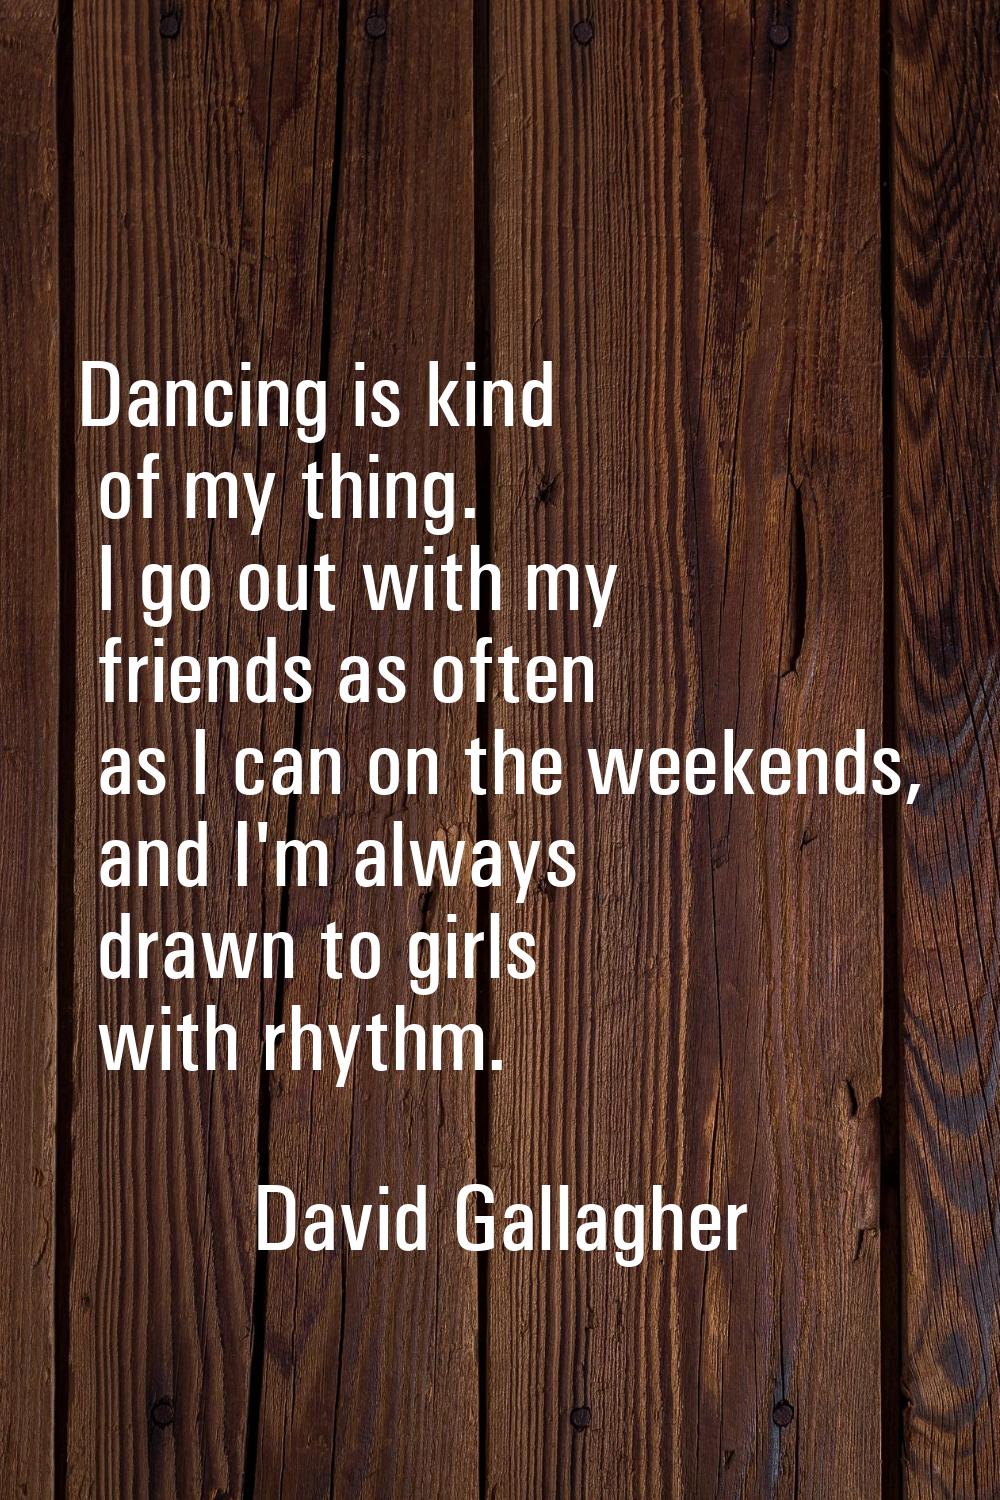 Dancing is kind of my thing. I go out with my friends as often as I can on the weekends, and I'm al